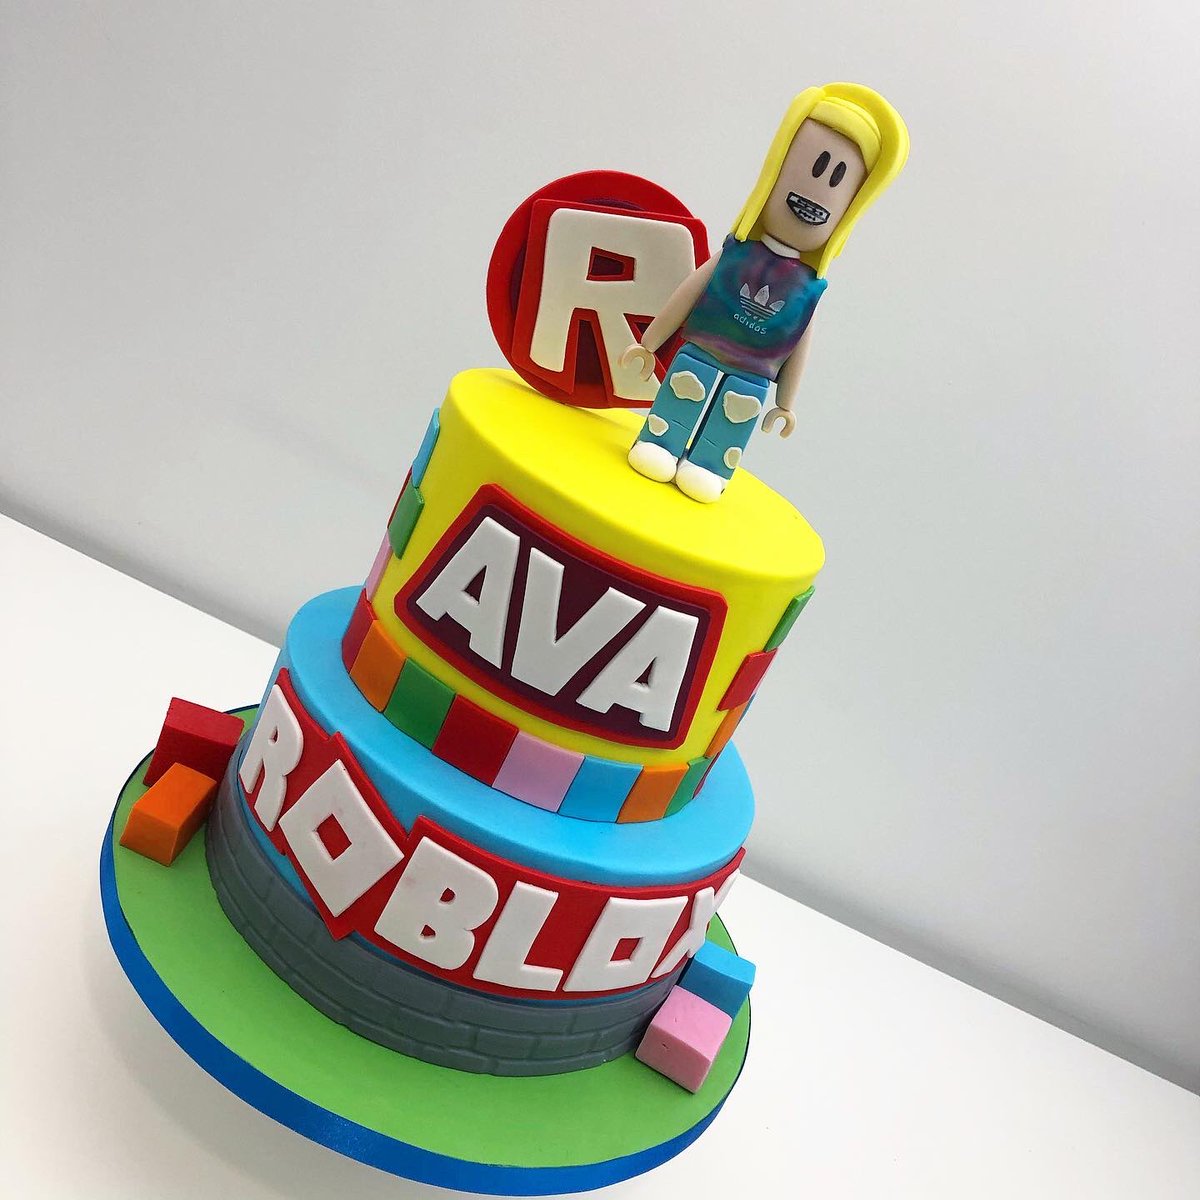 Tidbits Treats On Twitter Ava S Roblox Cake Complete With Her Own Avatar For Her 9th Birthday Cake Bespokecakes Birthdaycakes Cakes Birthday Sthelens Liverpool Cheshire Warrington Roblox Robloxcake Robloxparty Avatar Https - roblox 2019 logo birthday cakes